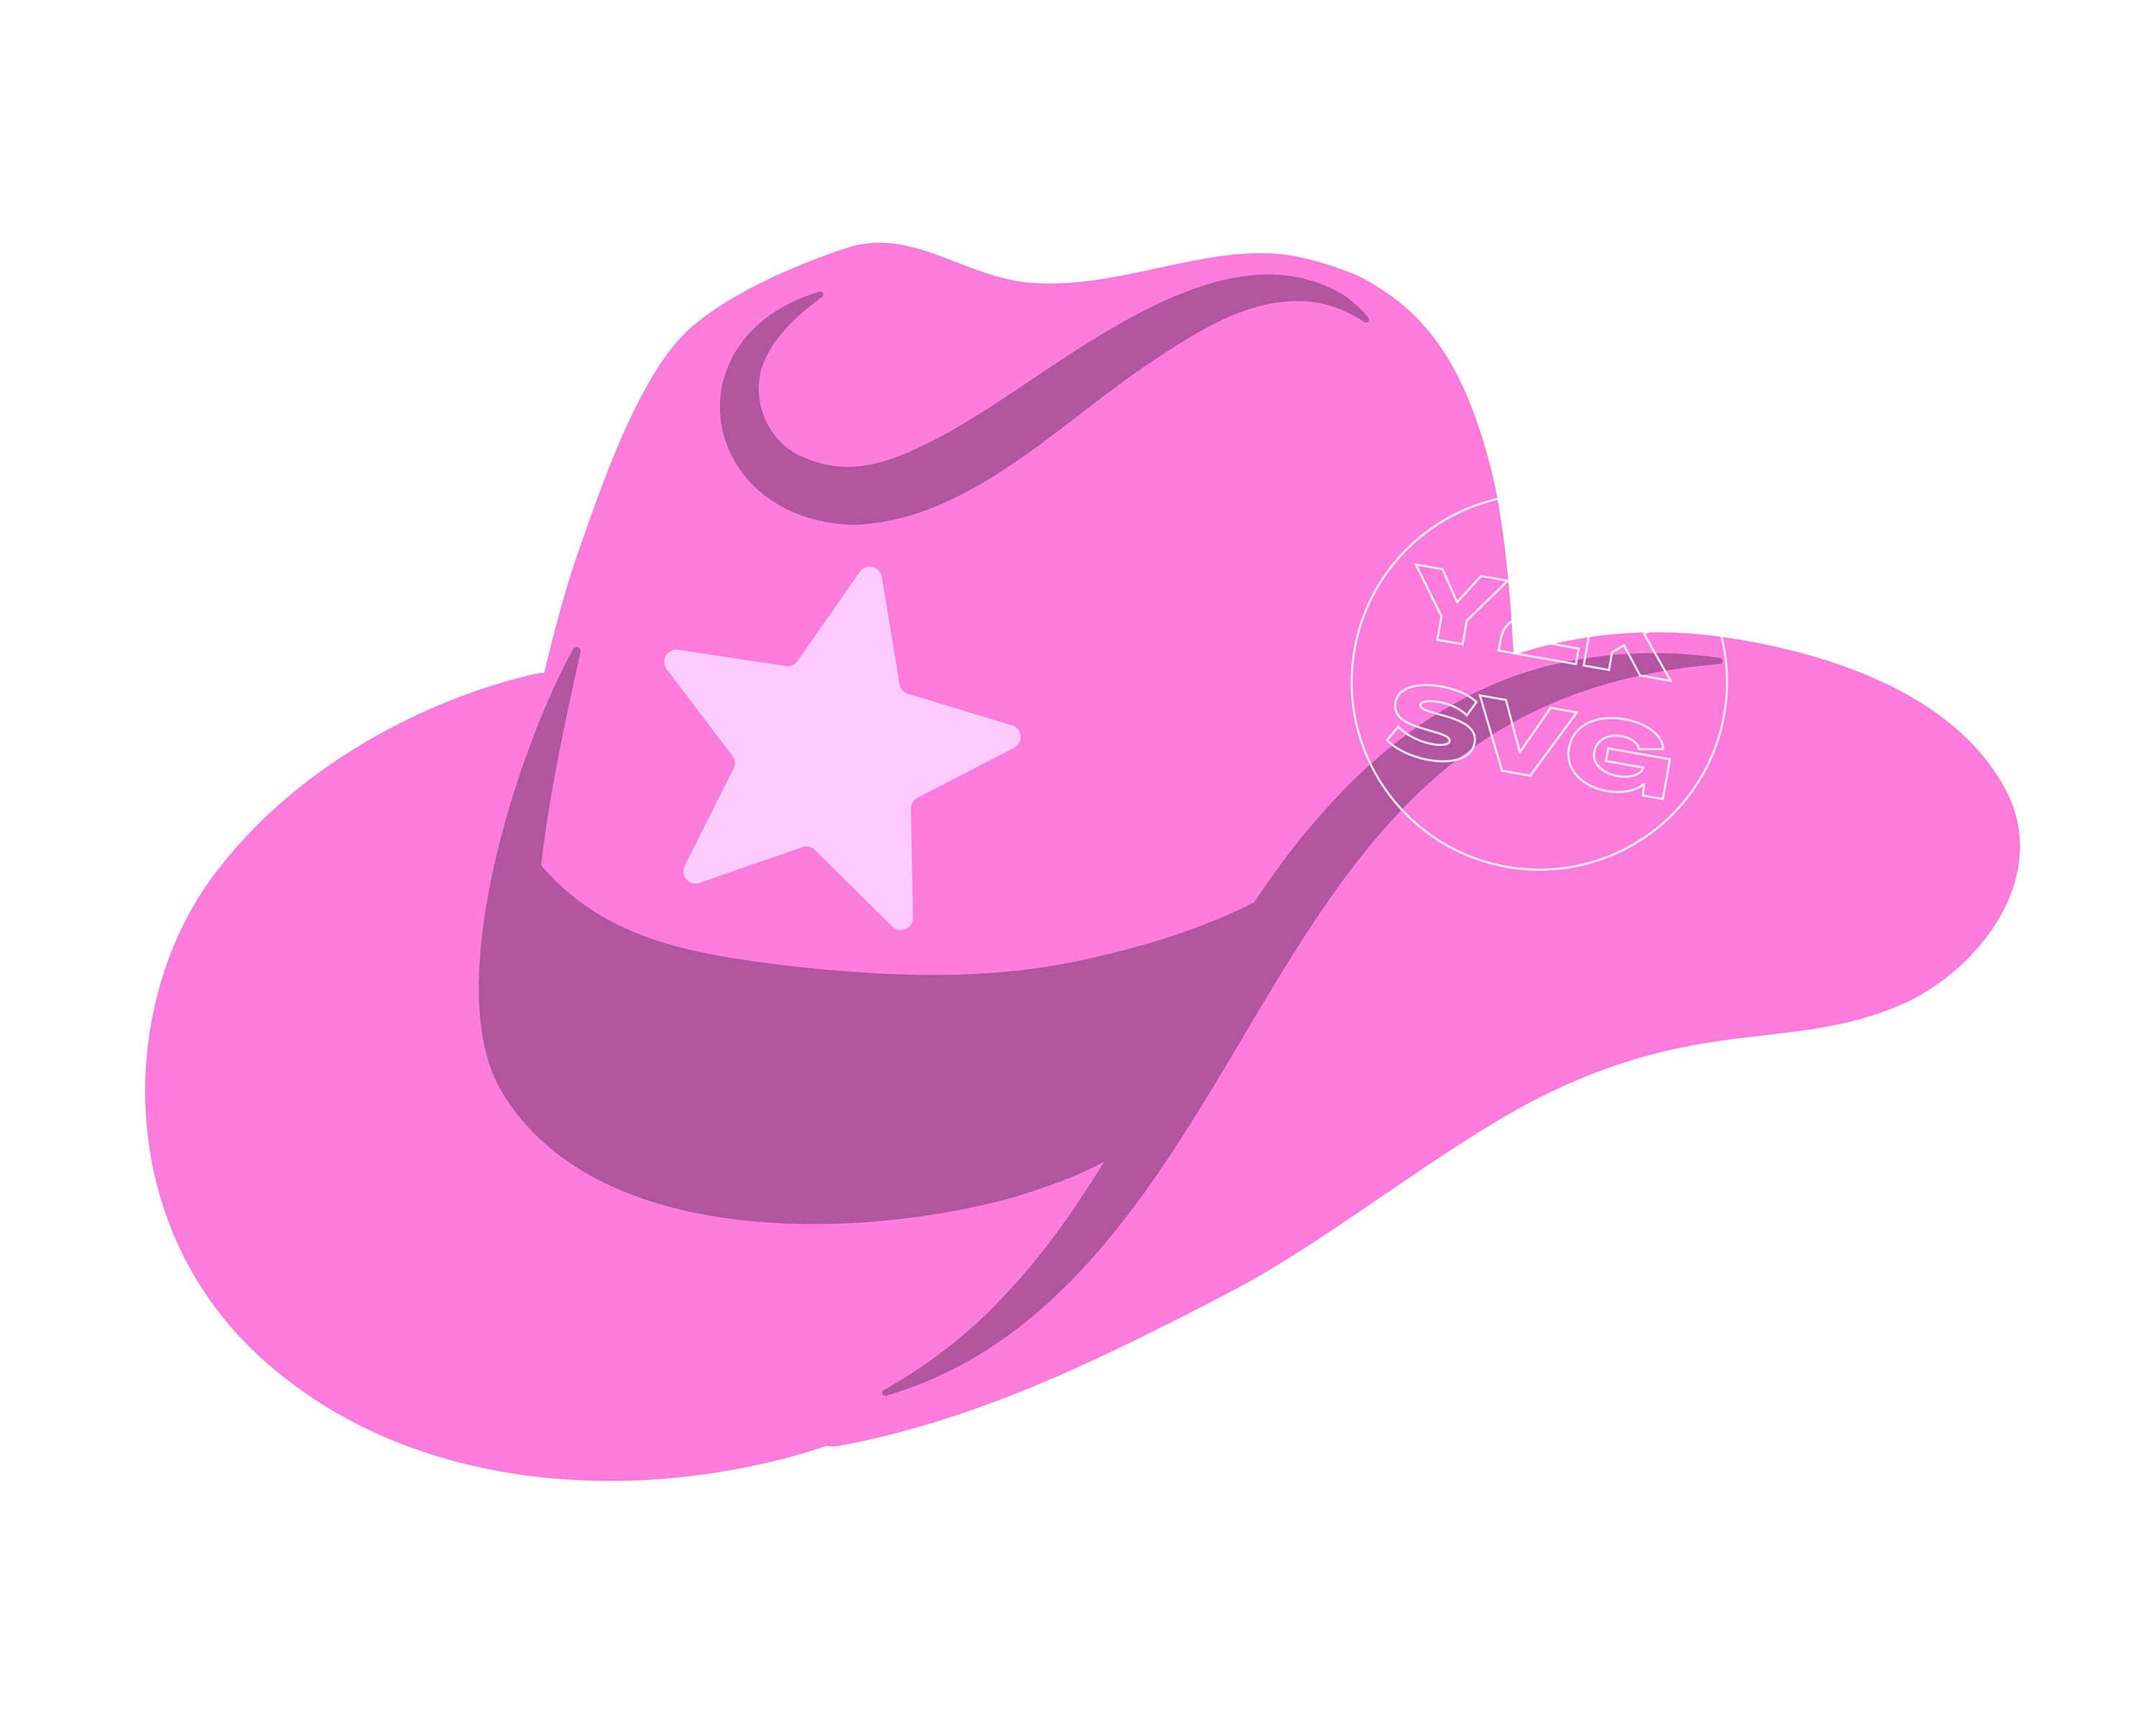 Cowboy Hat Wallpaper in 2022  Iphone background pink Preppy wallpaper  Wallpaper iphone love  Iphone wallpaper preppy Preppy wallpaper Iphone  background pink